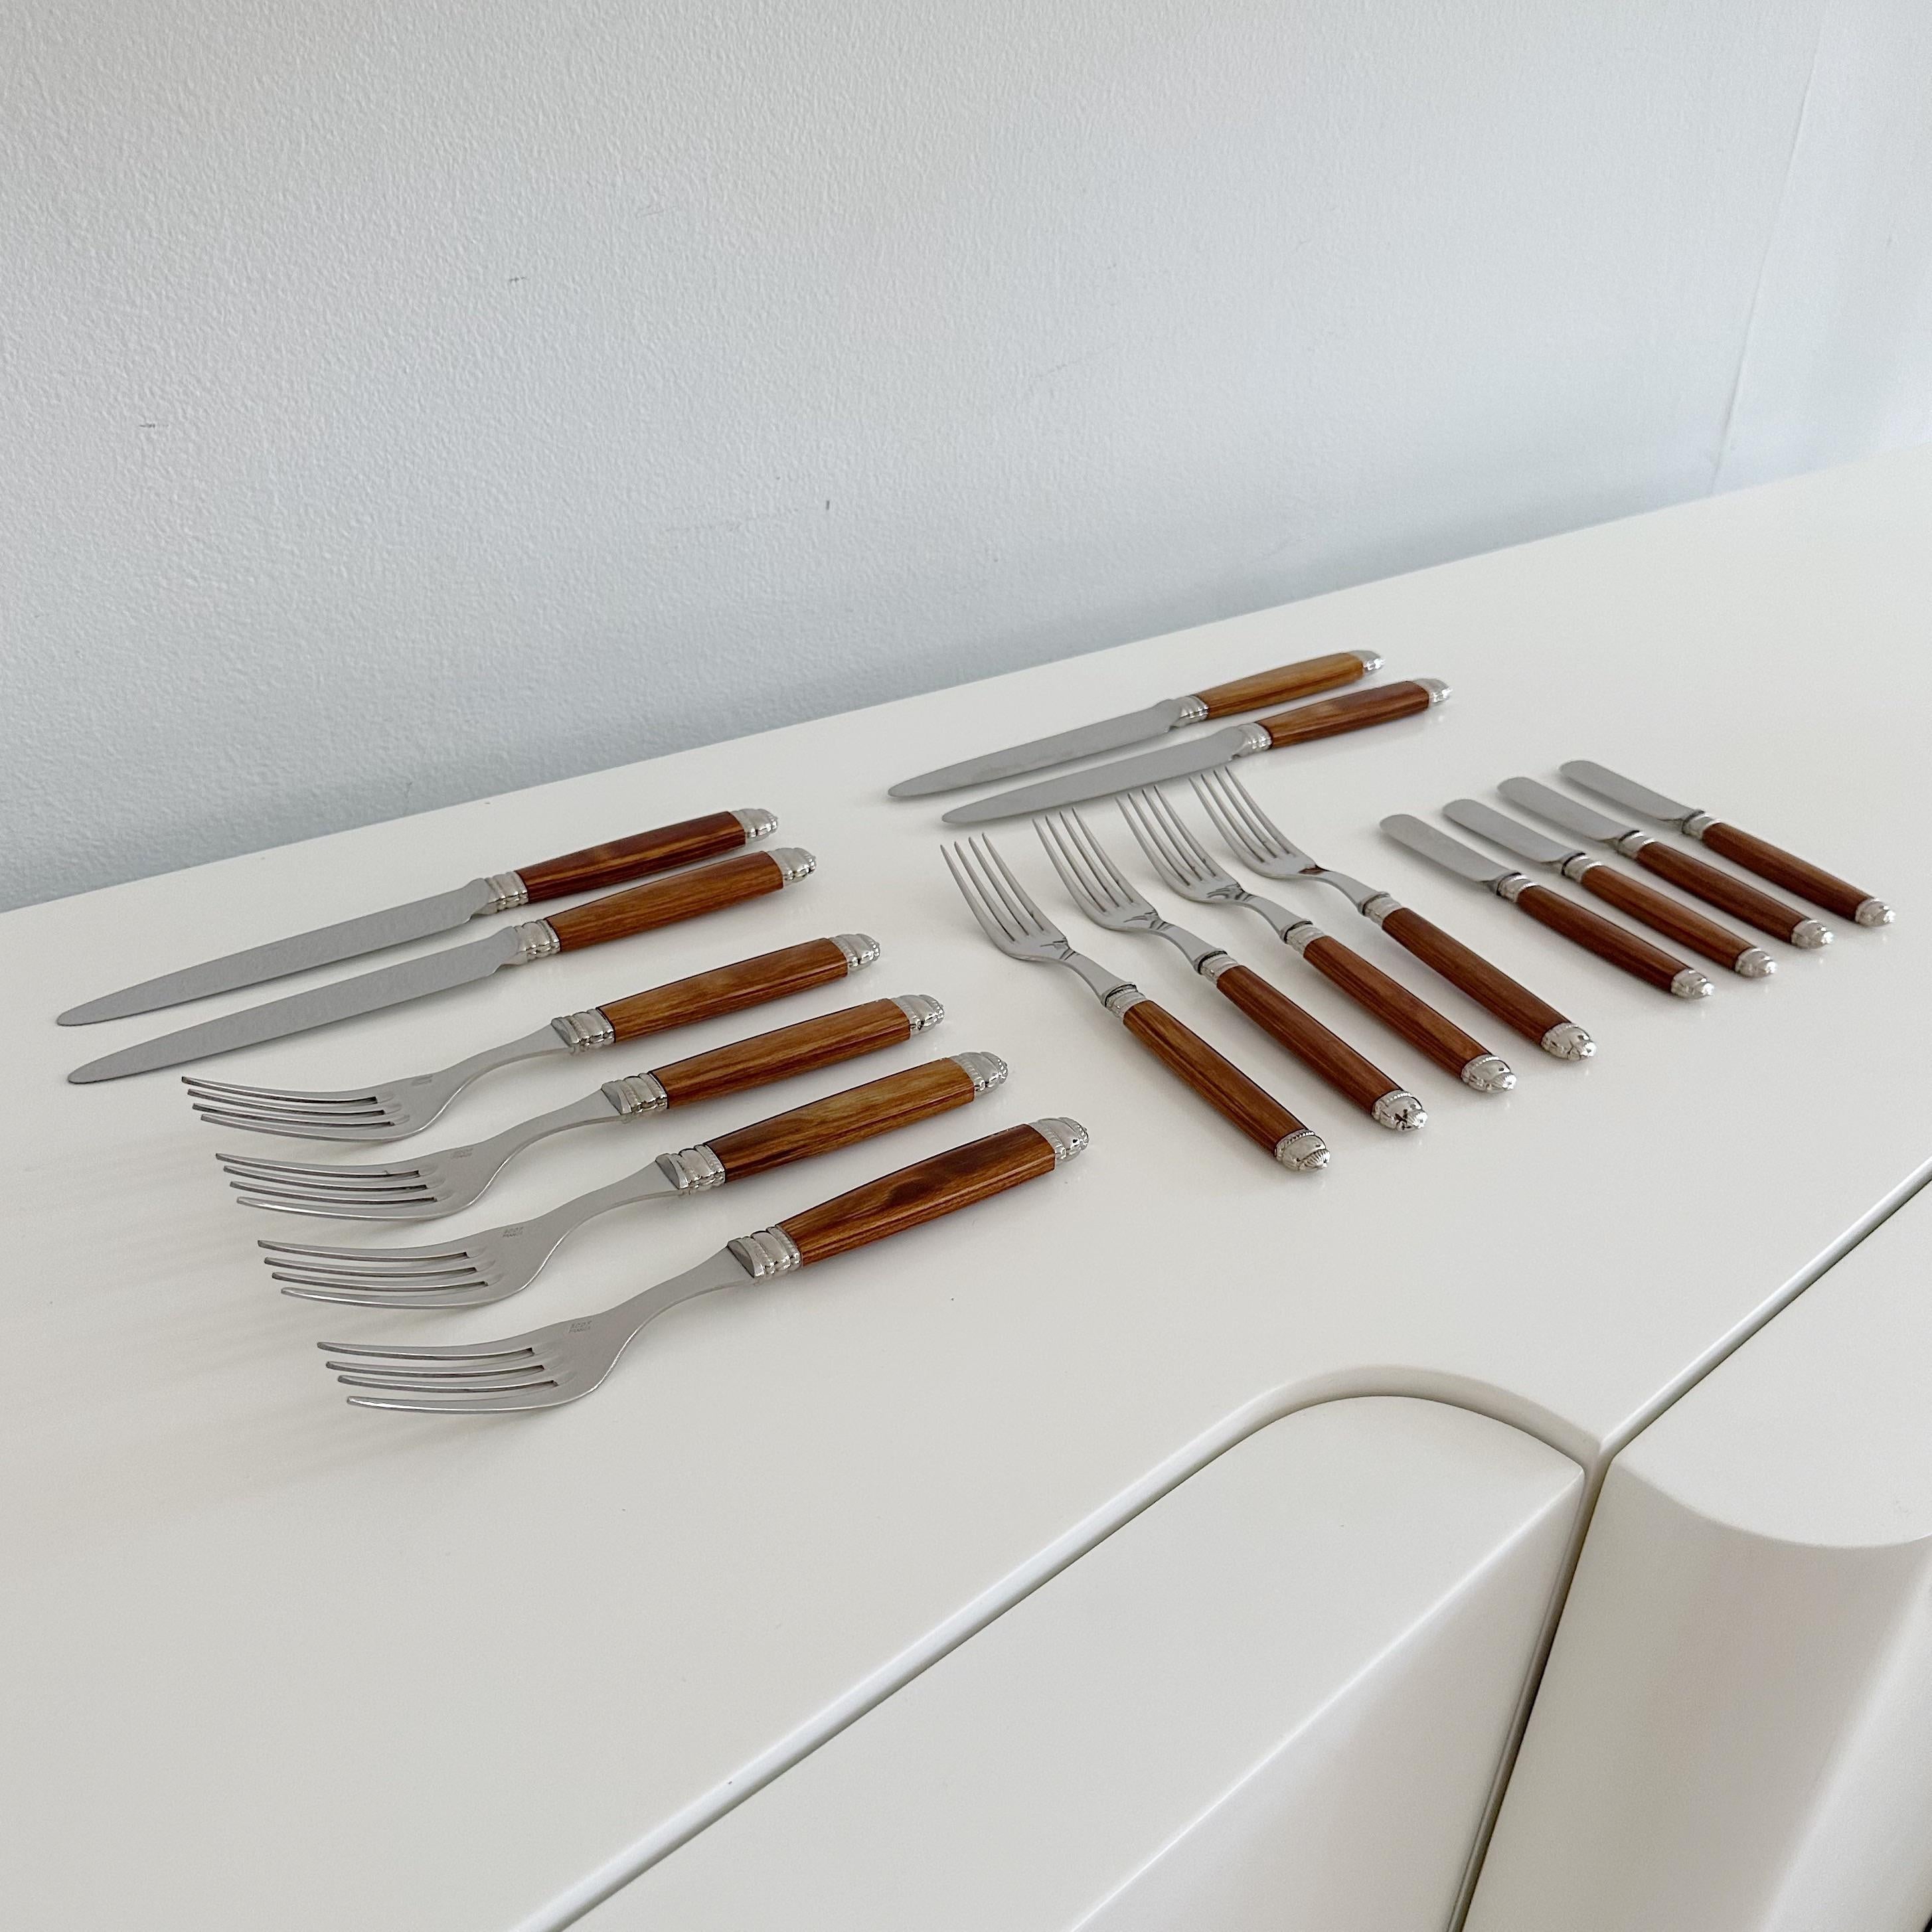 Set of Scof France 16 piece cutlery set. In the Reclaimer Rio pattern. Consisting of 4 dinner knives, four dinner forks, four salad forks and four bread knives. Stainless steel with mahogany color handles in excellent condition with original box.